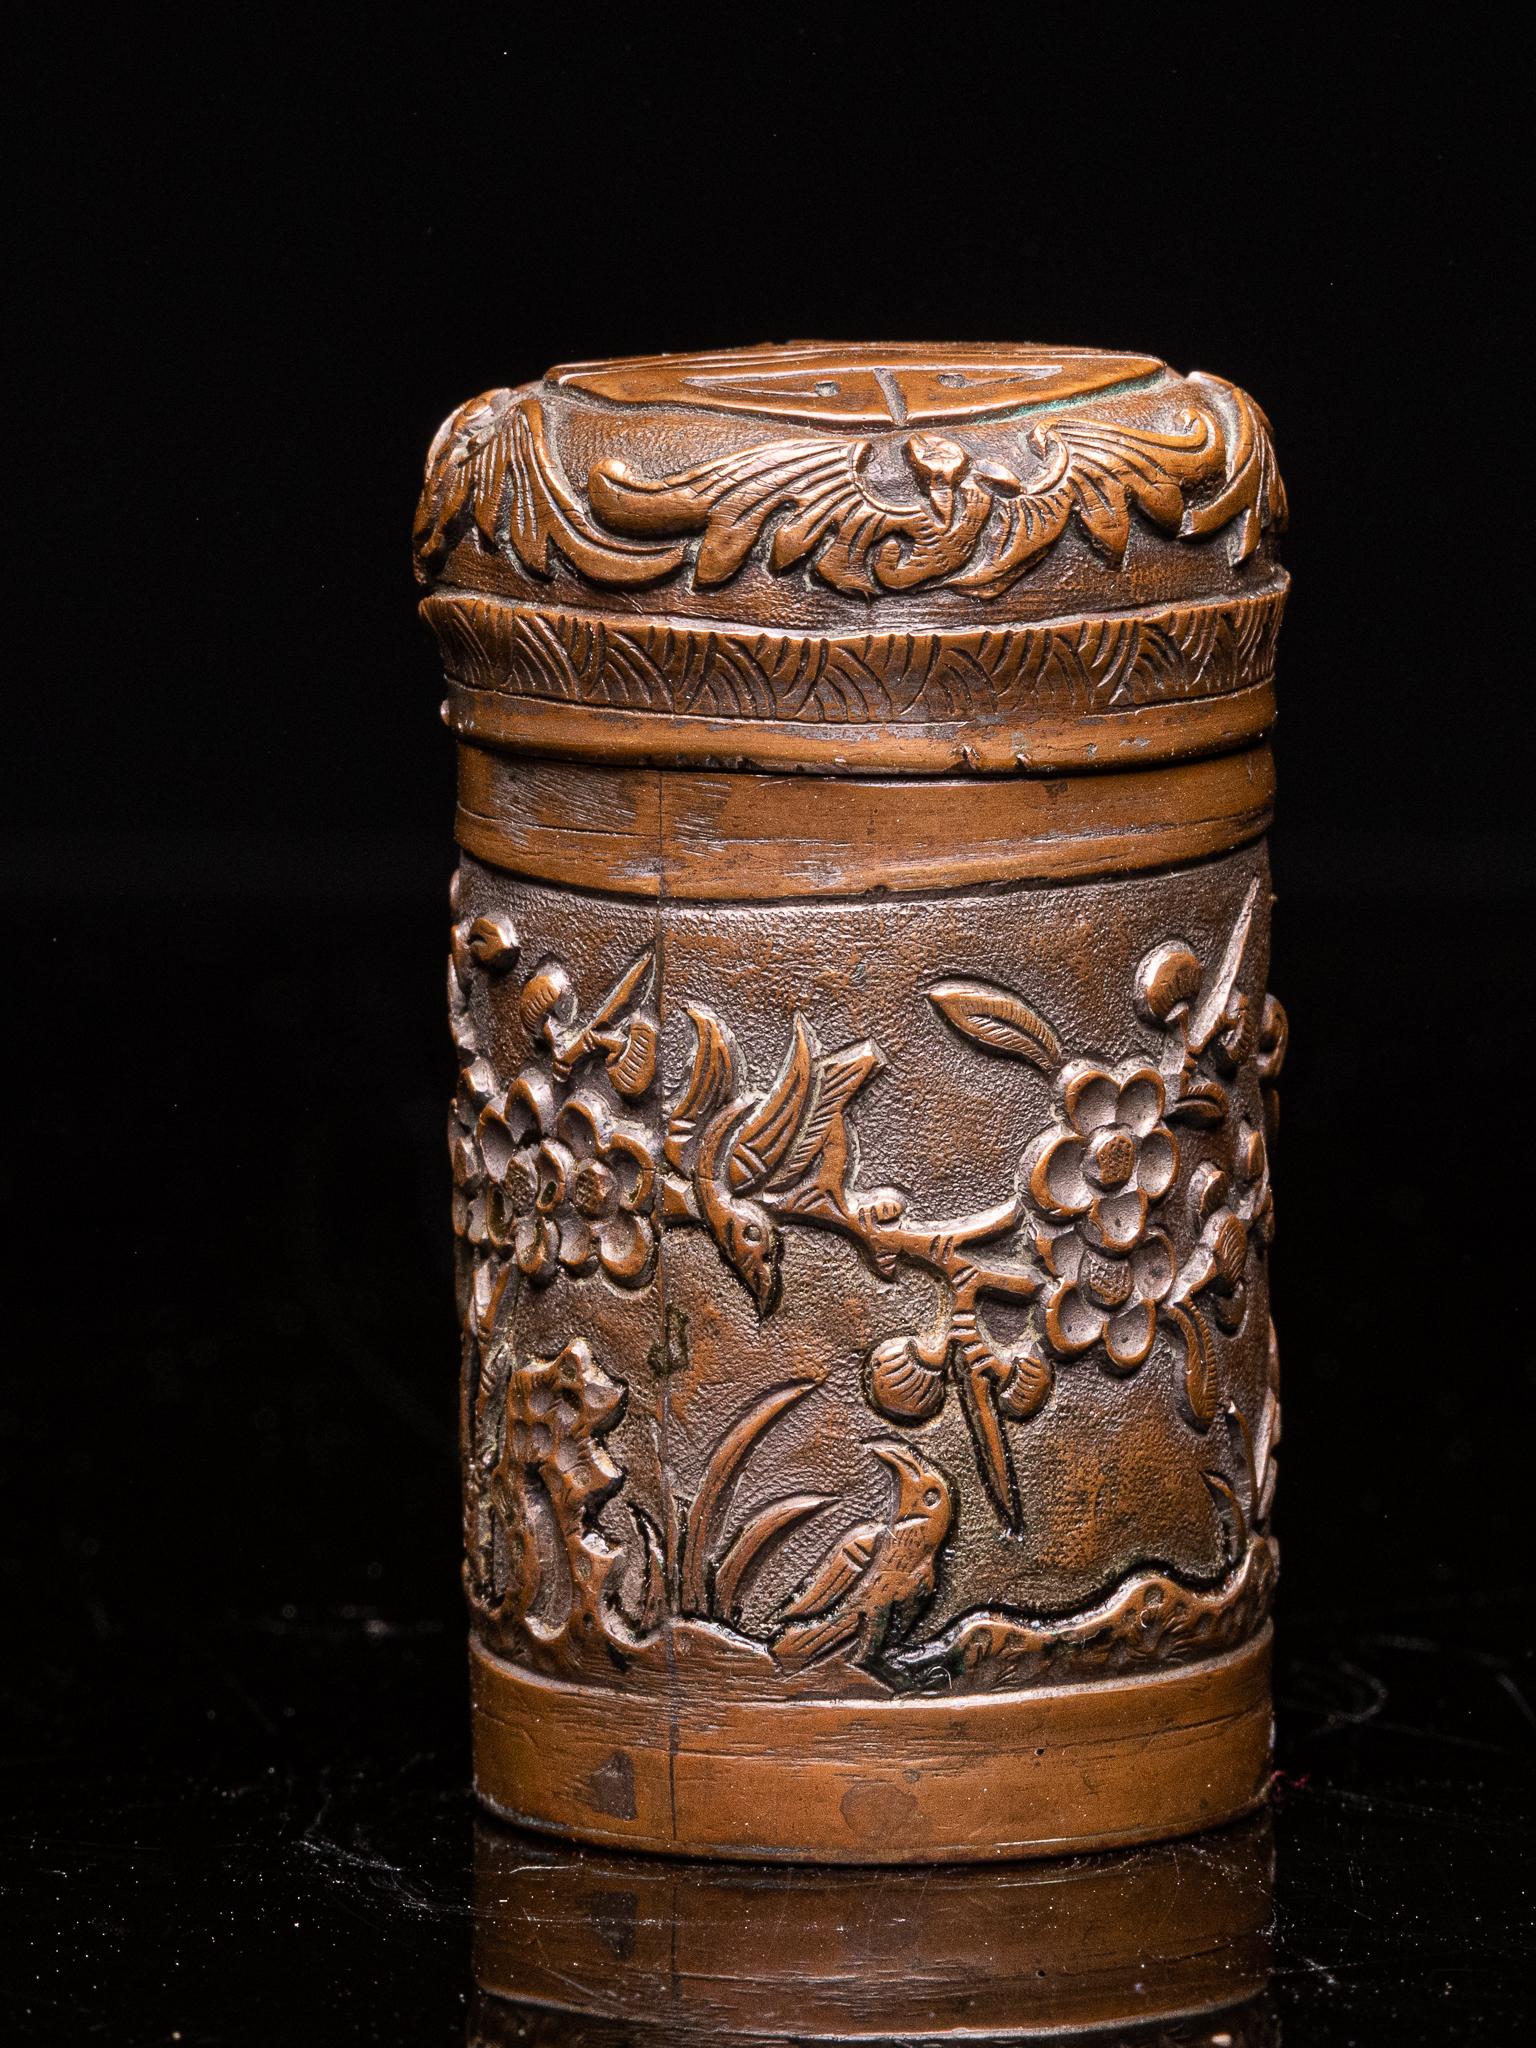 Hand-Carved Antique Chinese Opium Box in Hammered Brass, Decorated with a Scene of a Rider For Sale